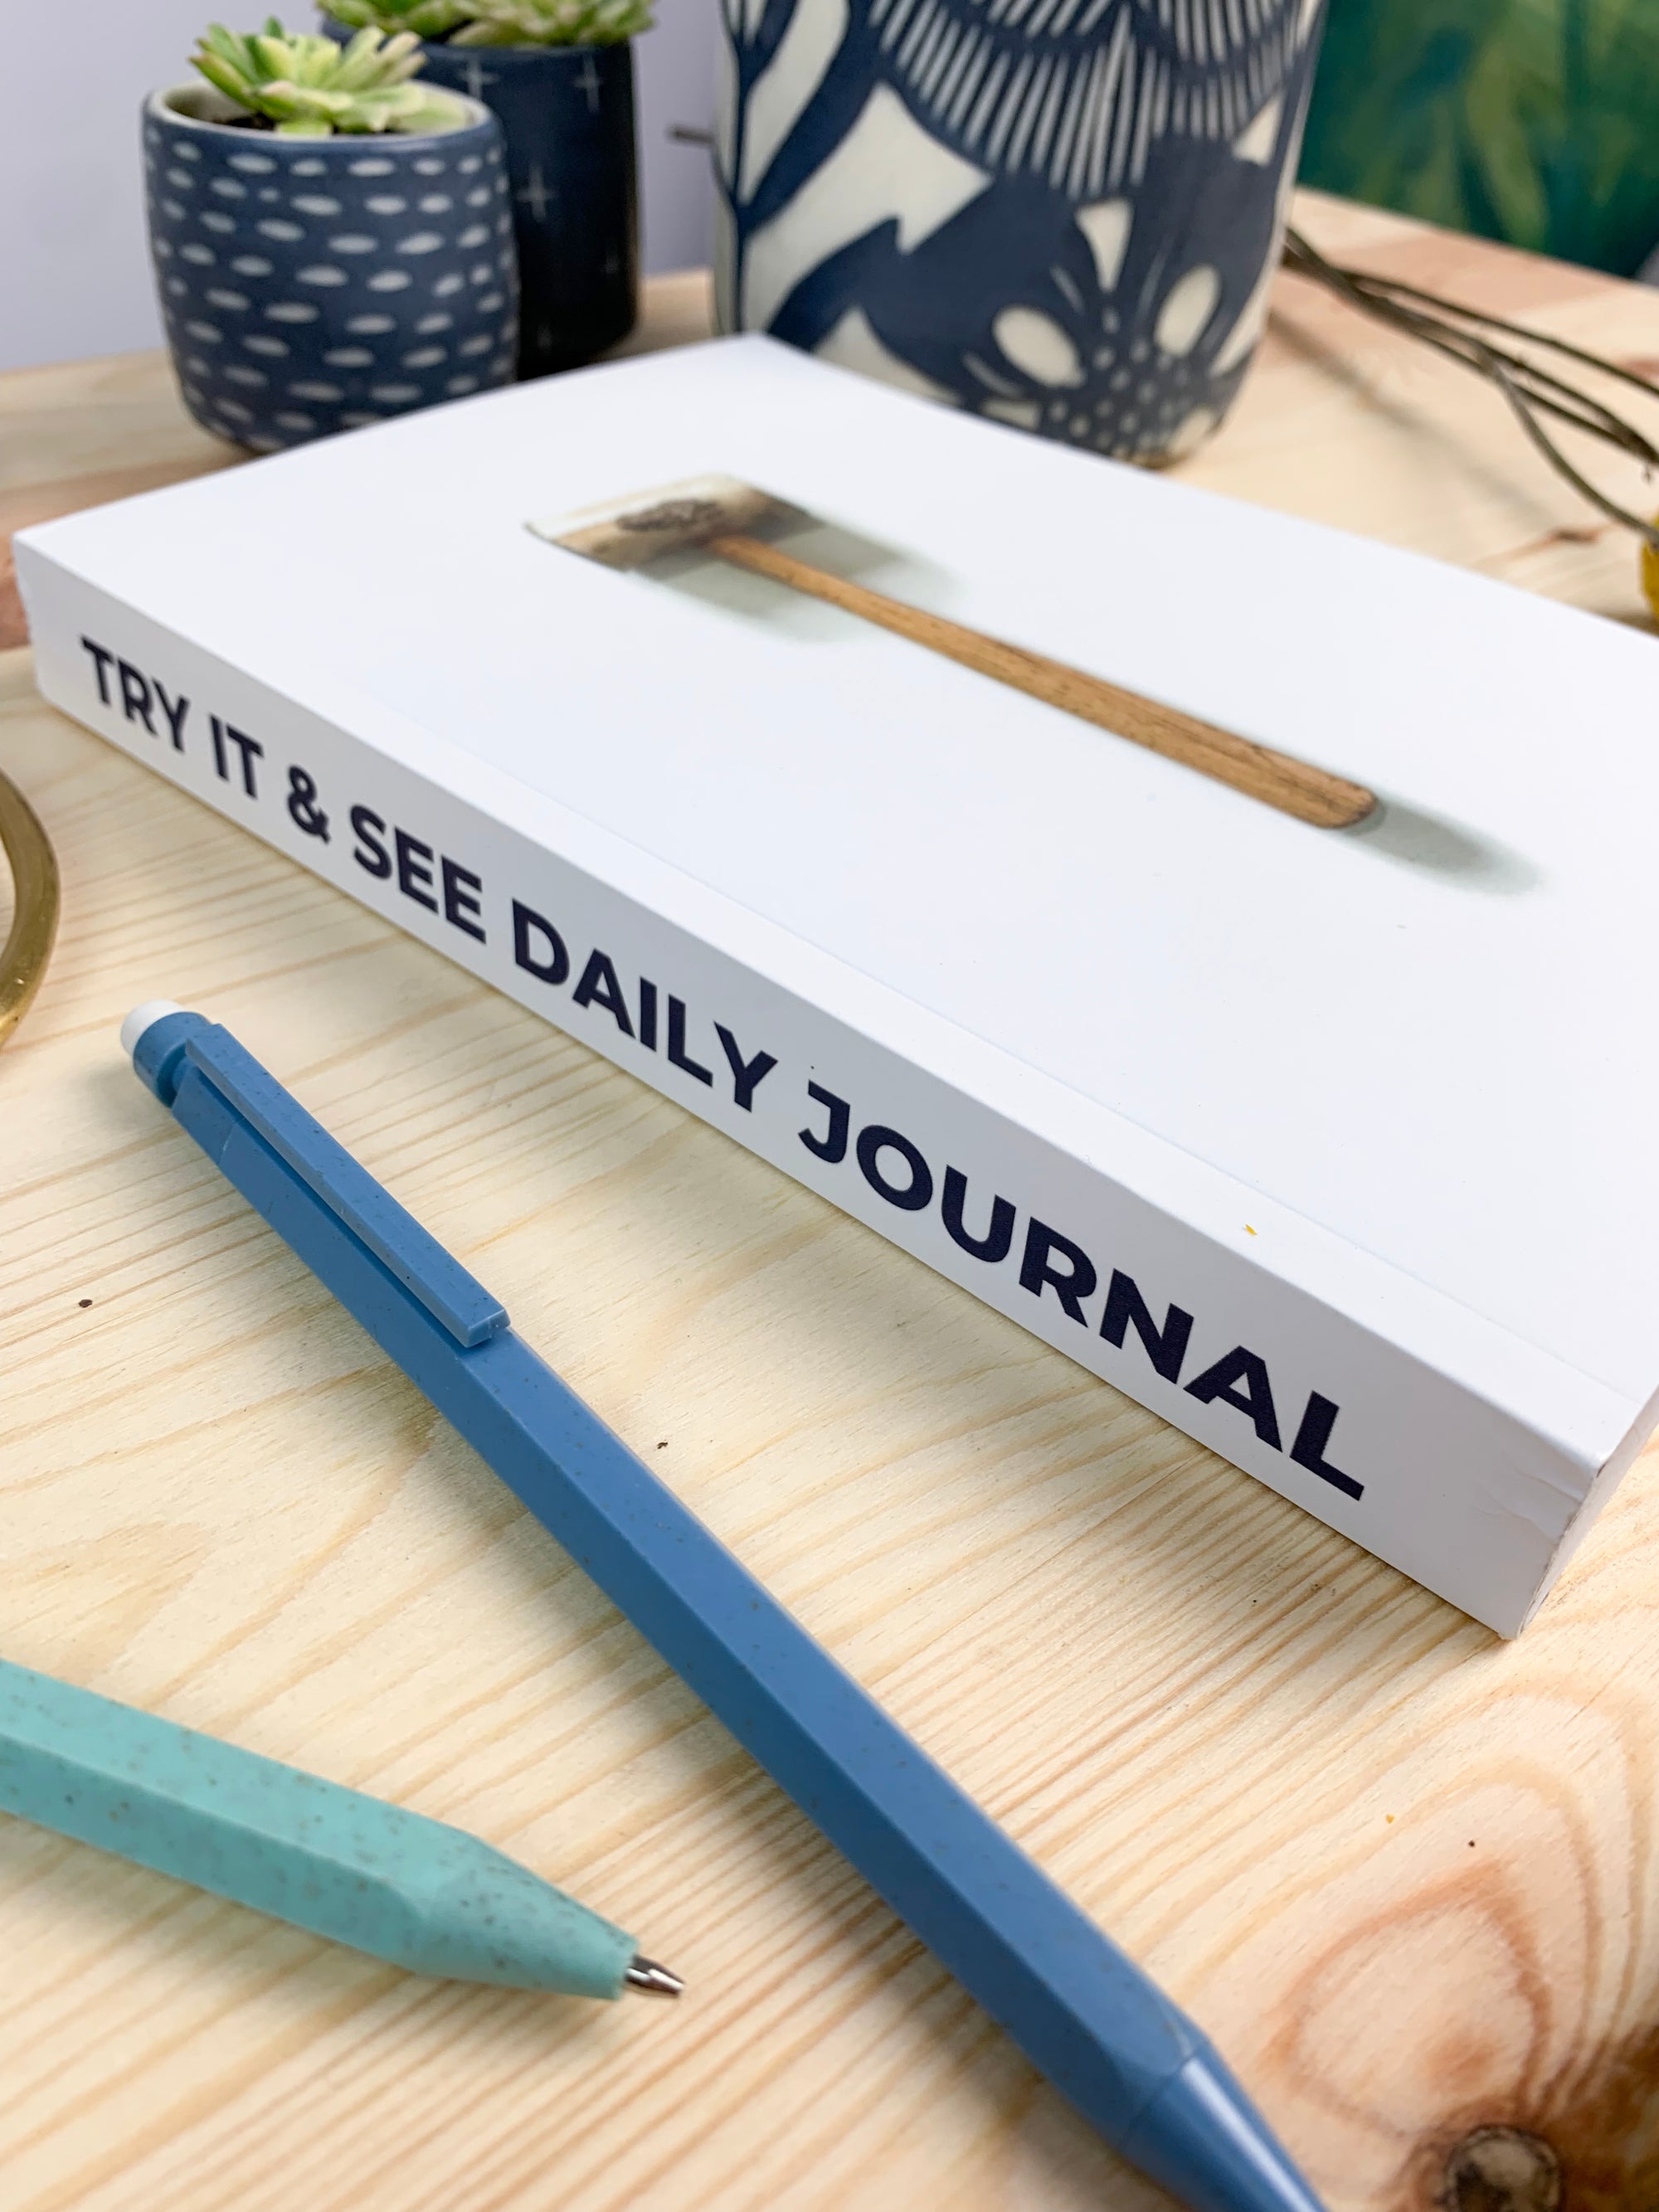 Try It & See Daily Journal